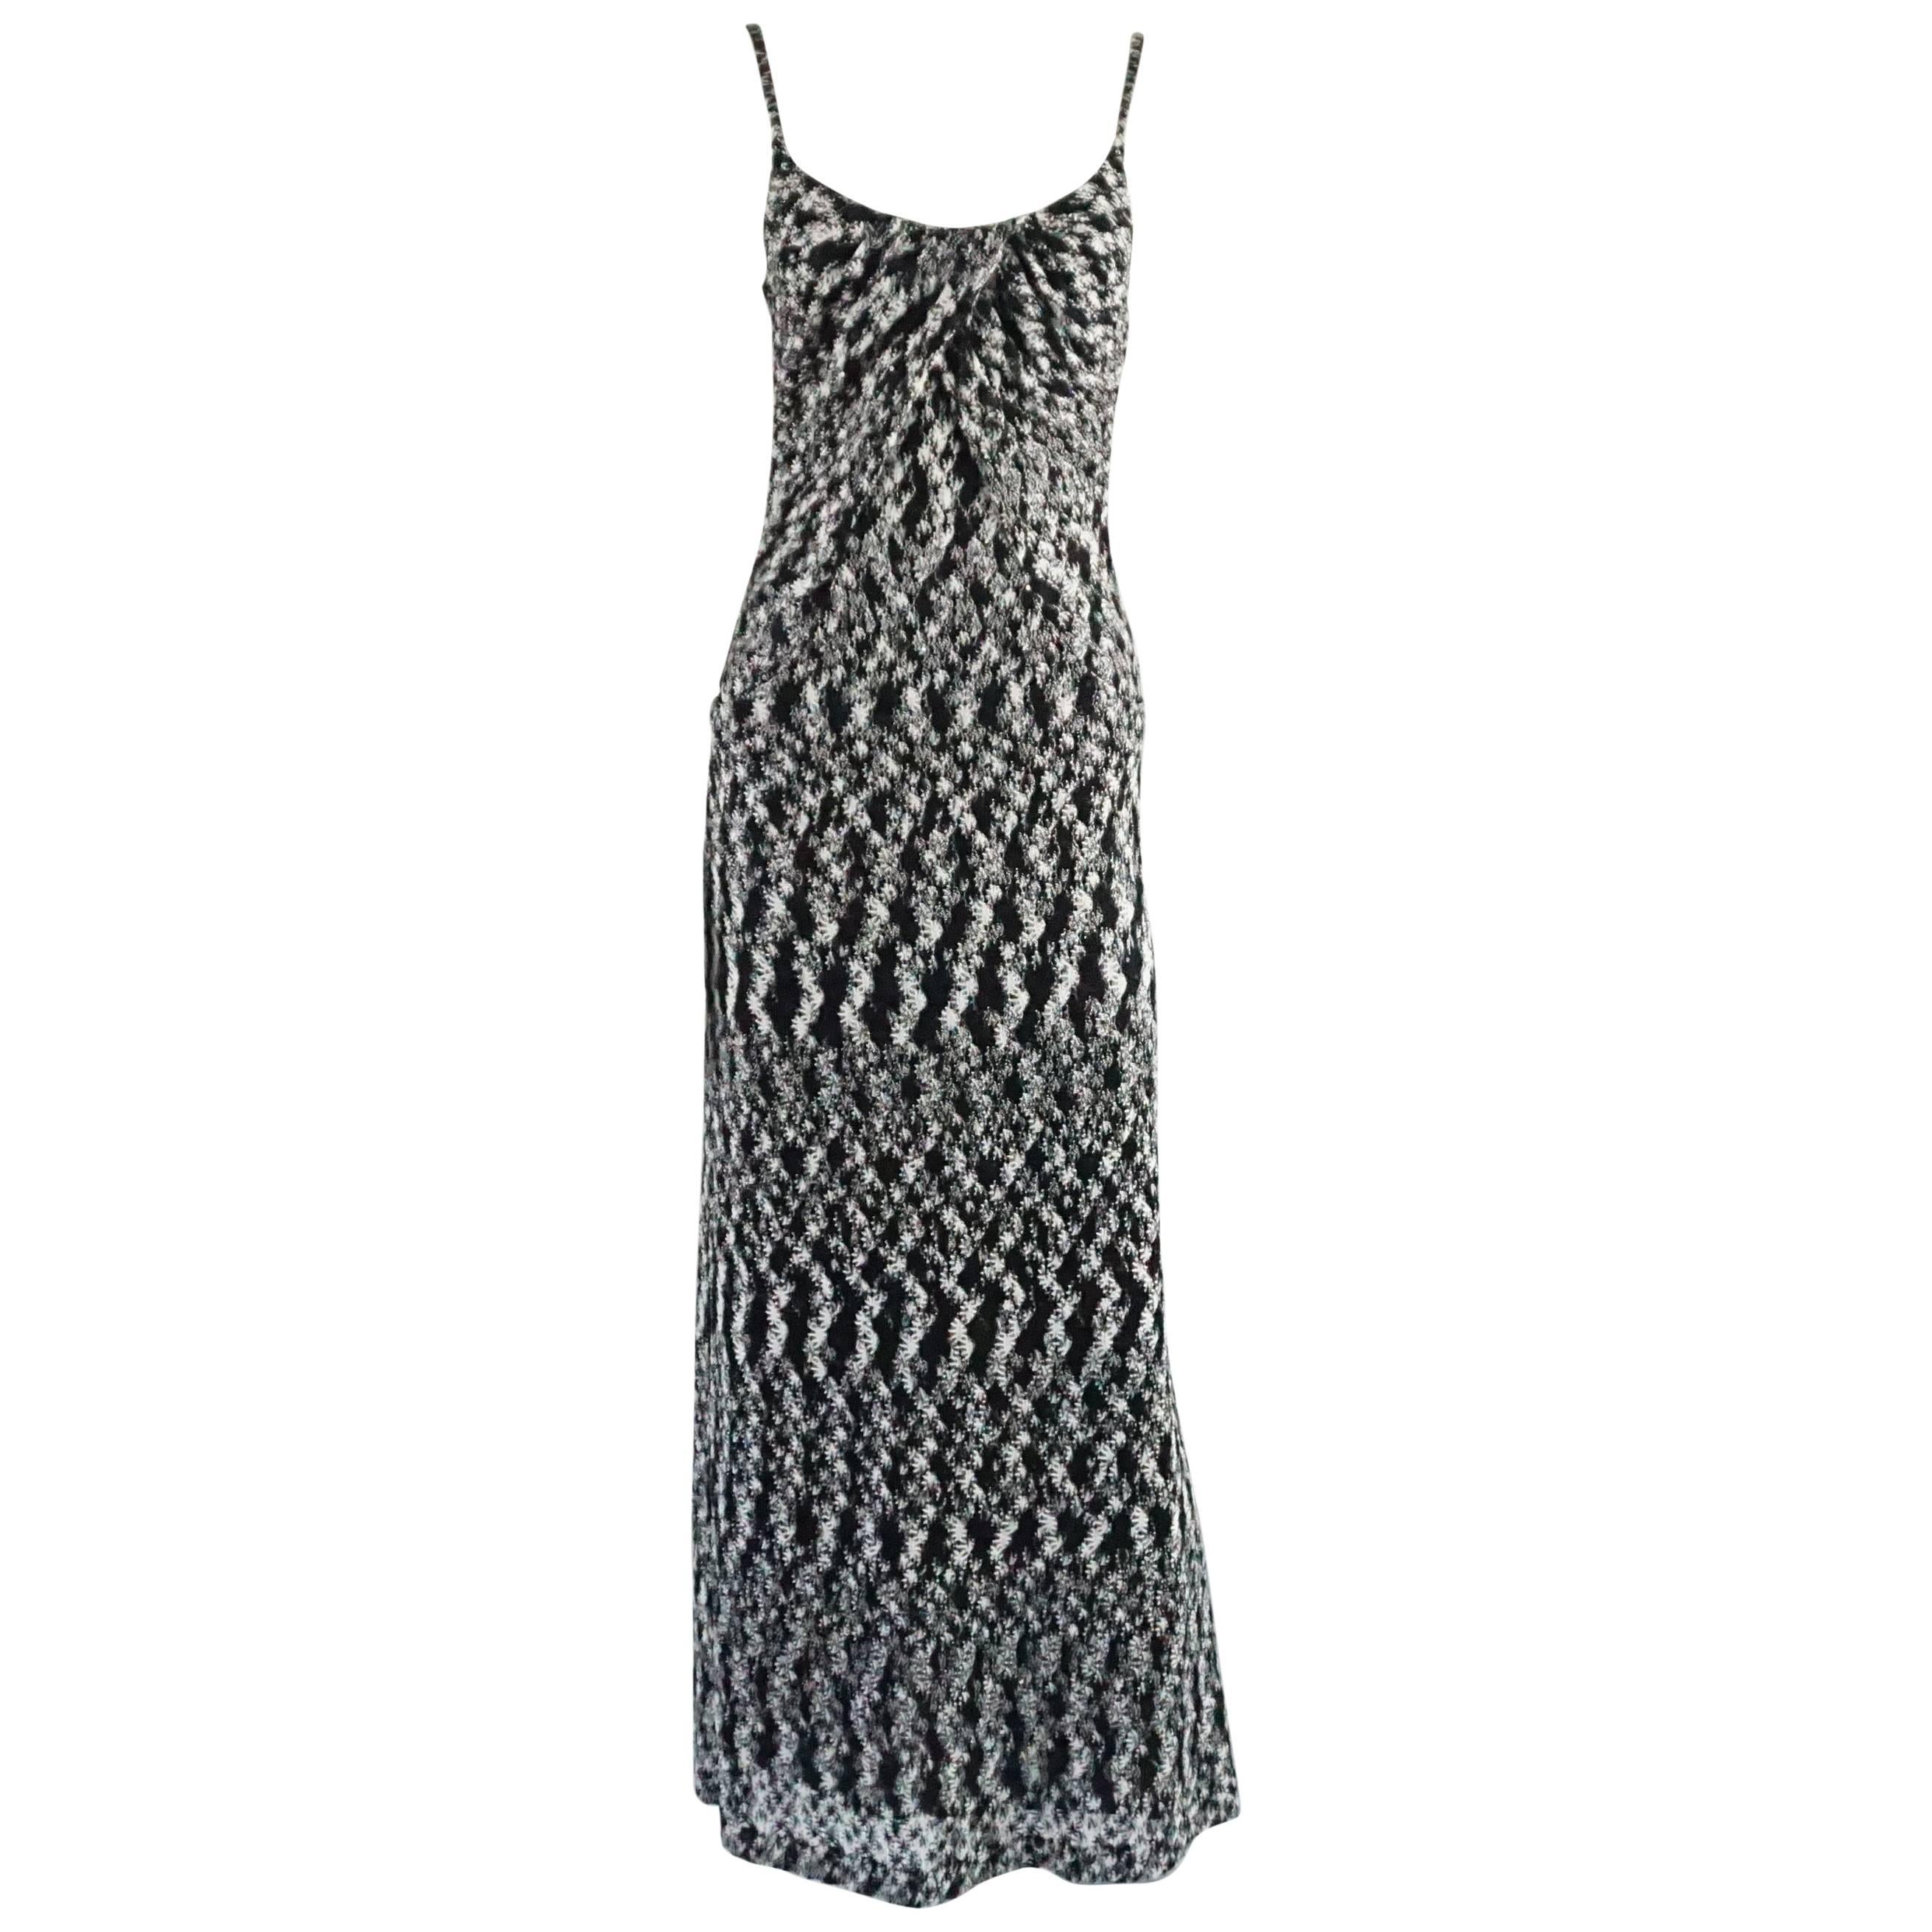 Missoni Black and White Knitted Maxi Dress with Pockets - 38